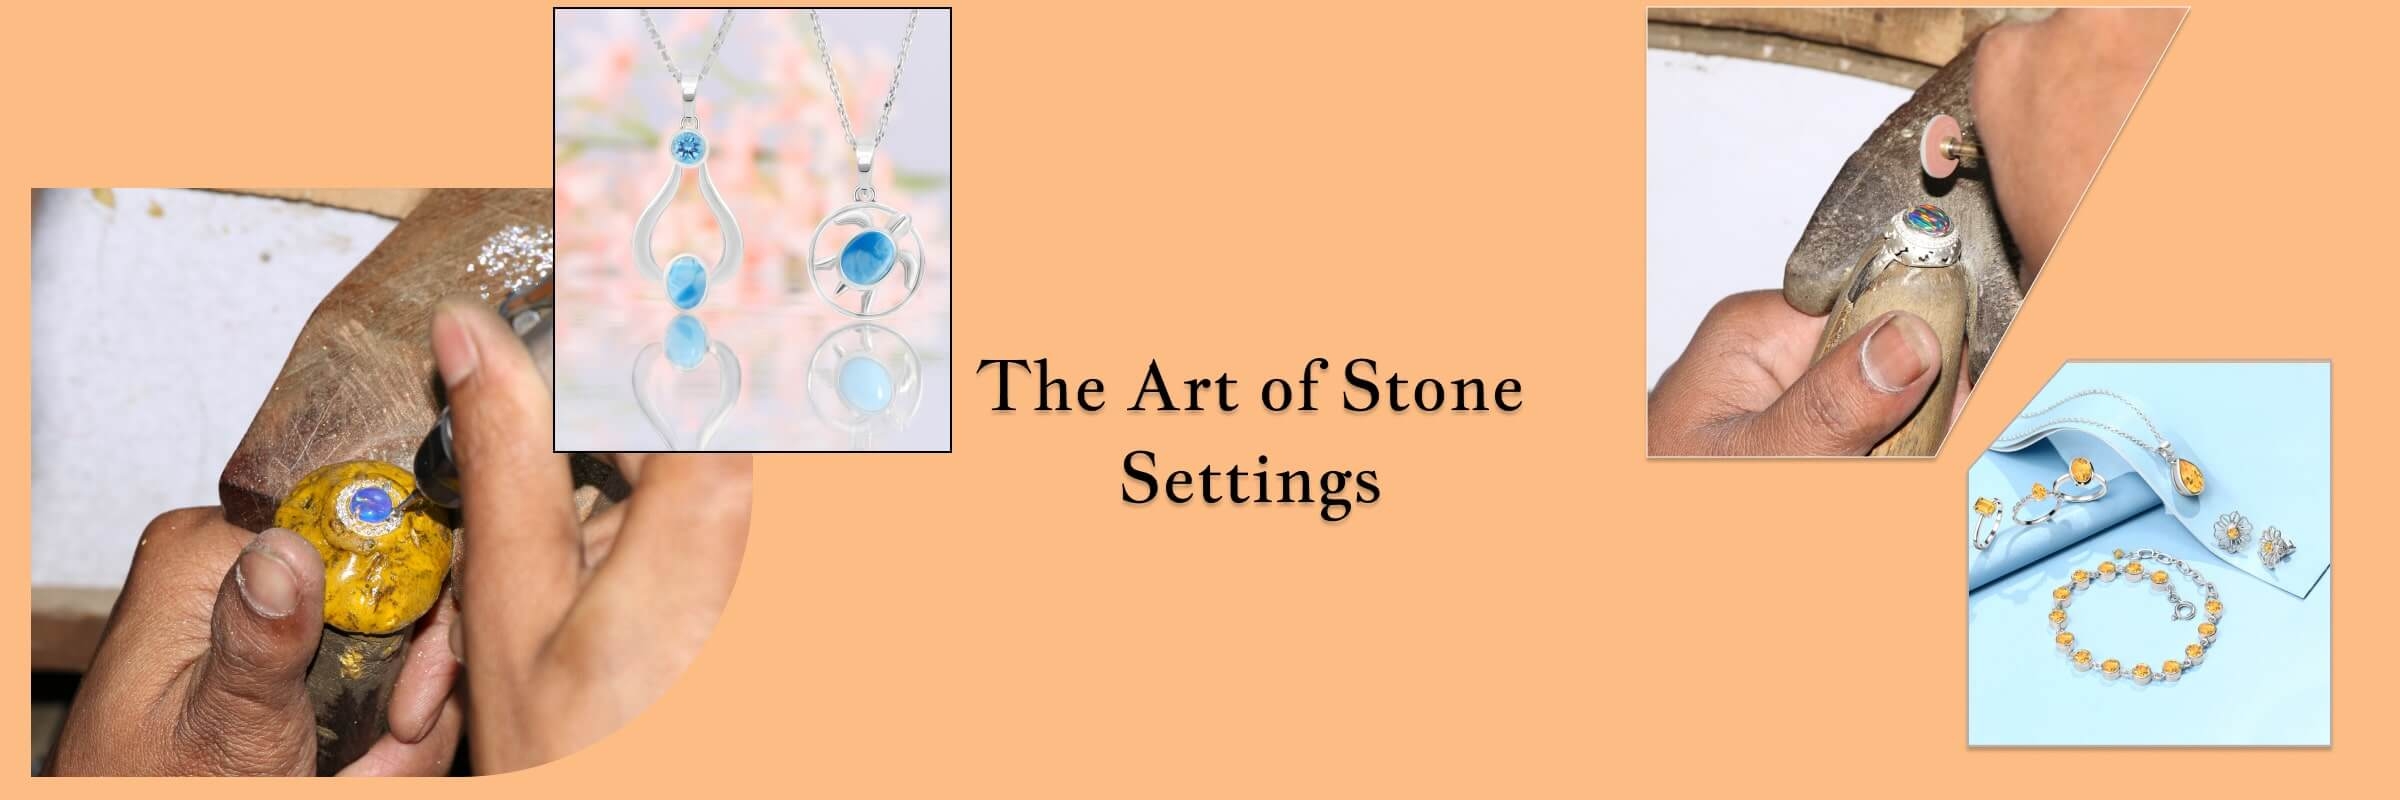 Stone Settings and its Process